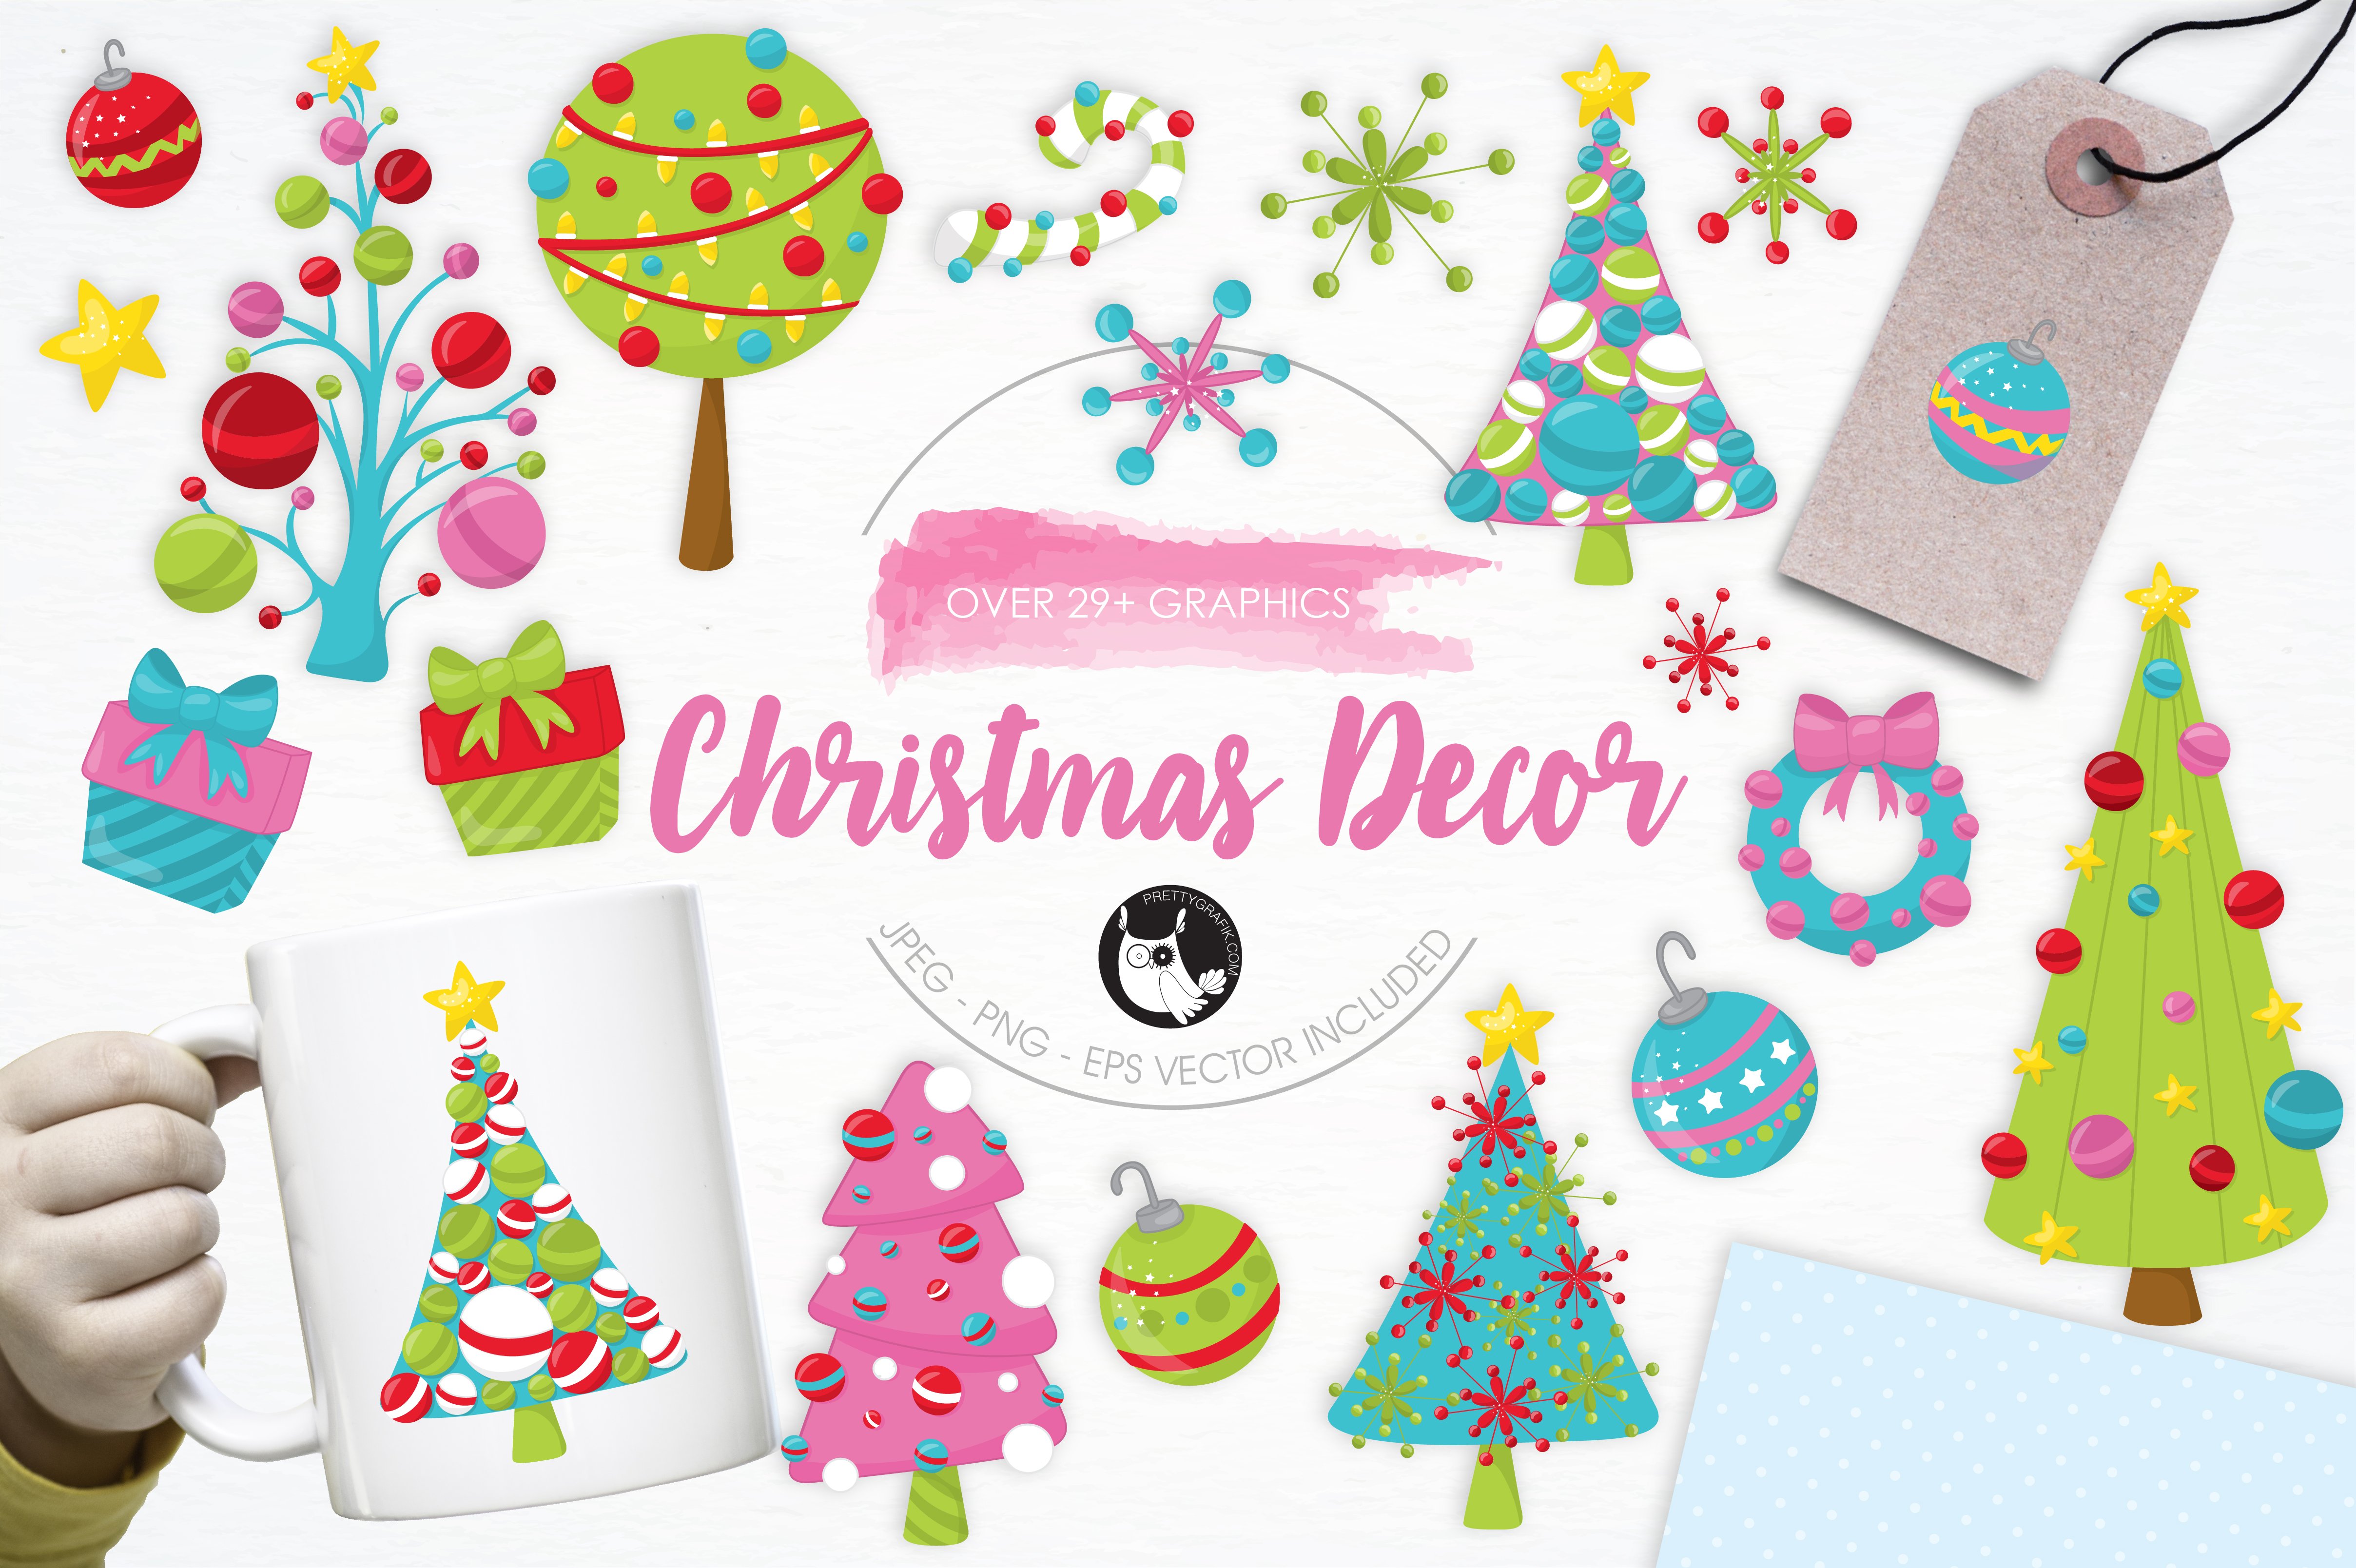 Christmas Décor Illustration Pack - Vector Image